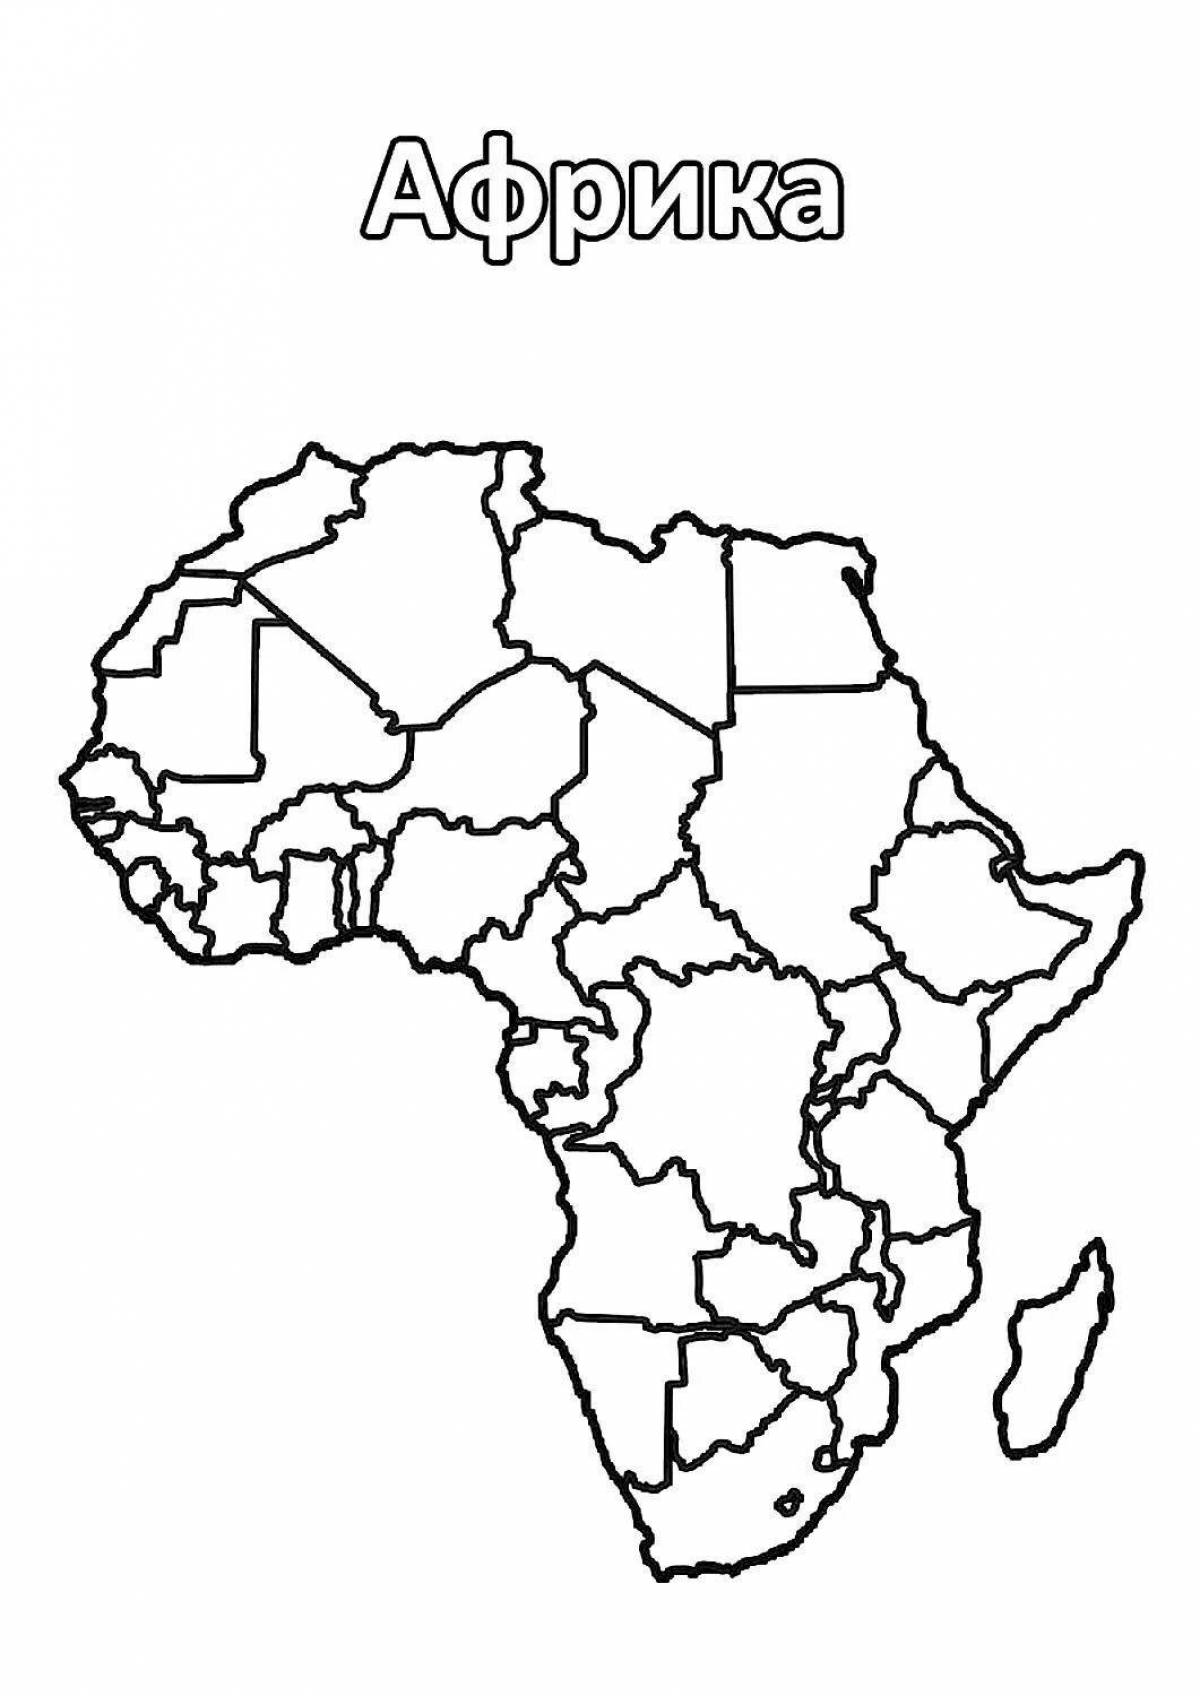 Unique africa map coloring page